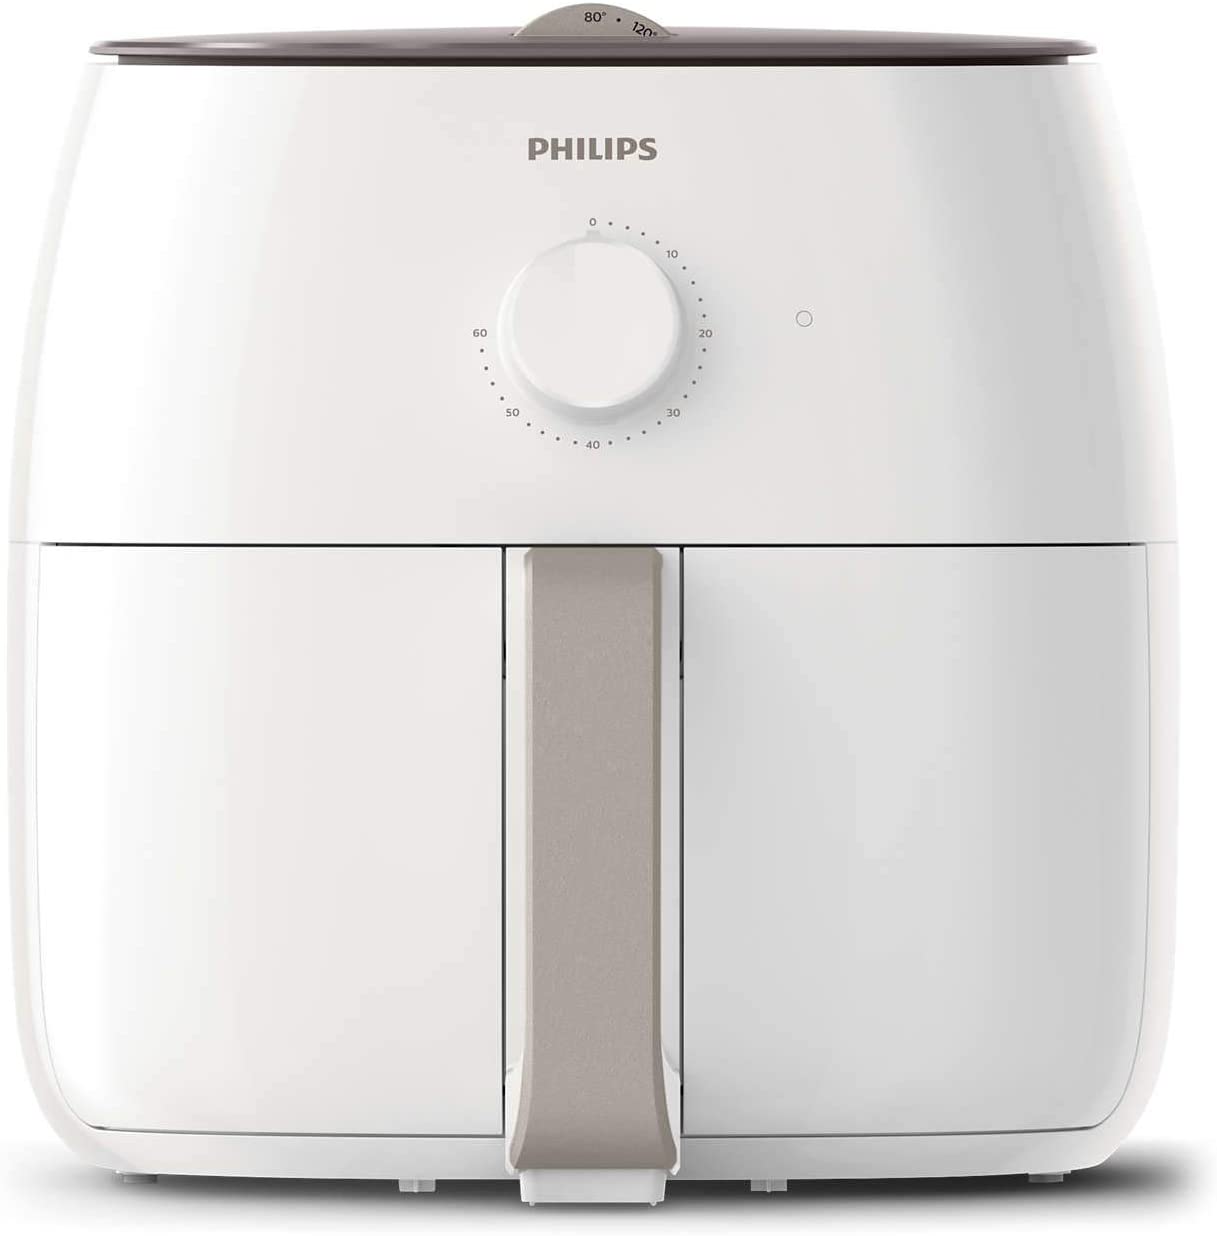 PHILIPS Air Fryer XXL Rapid Air Technology for Healthy Cooking